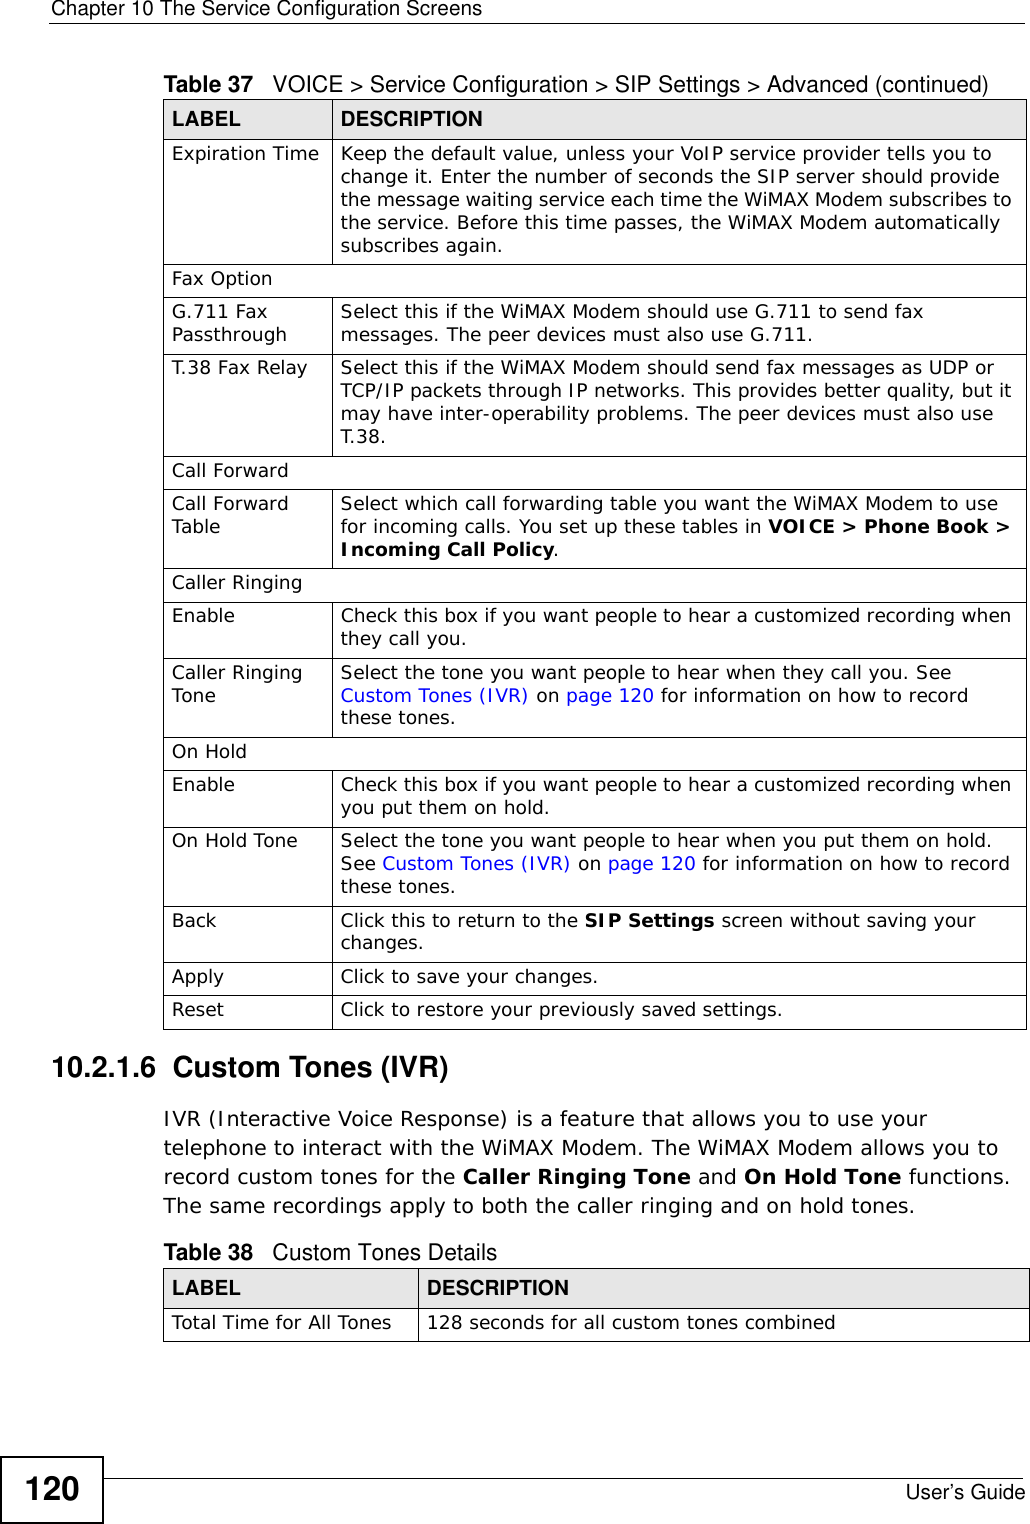 Chapter 10 The Service Configuration ScreensUser’s Guide12010.2.1.6  Custom Tones (IVR)IVR (Interactive Voice Response) is a feature that allows you to use your telephone to interact with the WiMAX Modem. The WiMAX Modem allows you to record custom tones for the Caller Ringing Tone and On Hold Tone functions. The same recordings apply to both the caller ringing and on hold tones. Expiration Time Keep the default value, unless your VoIP service provider tells you to change it. Enter the number of seconds the SIP server should provide the message waiting service each time the WiMAX Modem subscribes to the service. Before this time passes, the WiMAX Modem automatically subscribes again.Fax OptionG.711 Fax Passthrough Select this if the WiMAX Modem should use G.711 to send fax messages. The peer devices must also use G.711.T.38 Fax Relay Select this if the WiMAX Modem should send fax messages as UDP or TCP/IP packets through IP networks. This provides better quality, but it may have inter-operability problems. The peer devices must also use T.38.Call ForwardCall Forward Table Select which call forwarding table you want the WiMAX Modem to use for incoming calls. You set up these tables in VOICE &gt; Phone Book &gt; Incoming Call Policy.Caller RingingEnable Check this box if you want people to hear a customized recording when they call you. Caller Ringing Tone Select the tone you want people to hear when they call you. See Custom Tones (IVR) on page 120 for information on how to record these tones.On HoldEnable Check this box if you want people to hear a customized recording when you put them on hold. On Hold Tone Select the tone you want people to hear when you put them on hold. See Custom Tones (IVR) on page 120 for information on how to record these tones.Back Click this to return to the SIP Settings screen without saving your changes.Apply Click to save your changes.Reset Click to restore your previously saved settings.Table 37   VOICE &gt; Service Configuration &gt; SIP Settings &gt; Advanced (continued)LABEL DESCRIPTIONTable 38   Custom Tones DetailsLABEL DESCRIPTIONTotal Time for All Tones 128 seconds for all custom tones combined